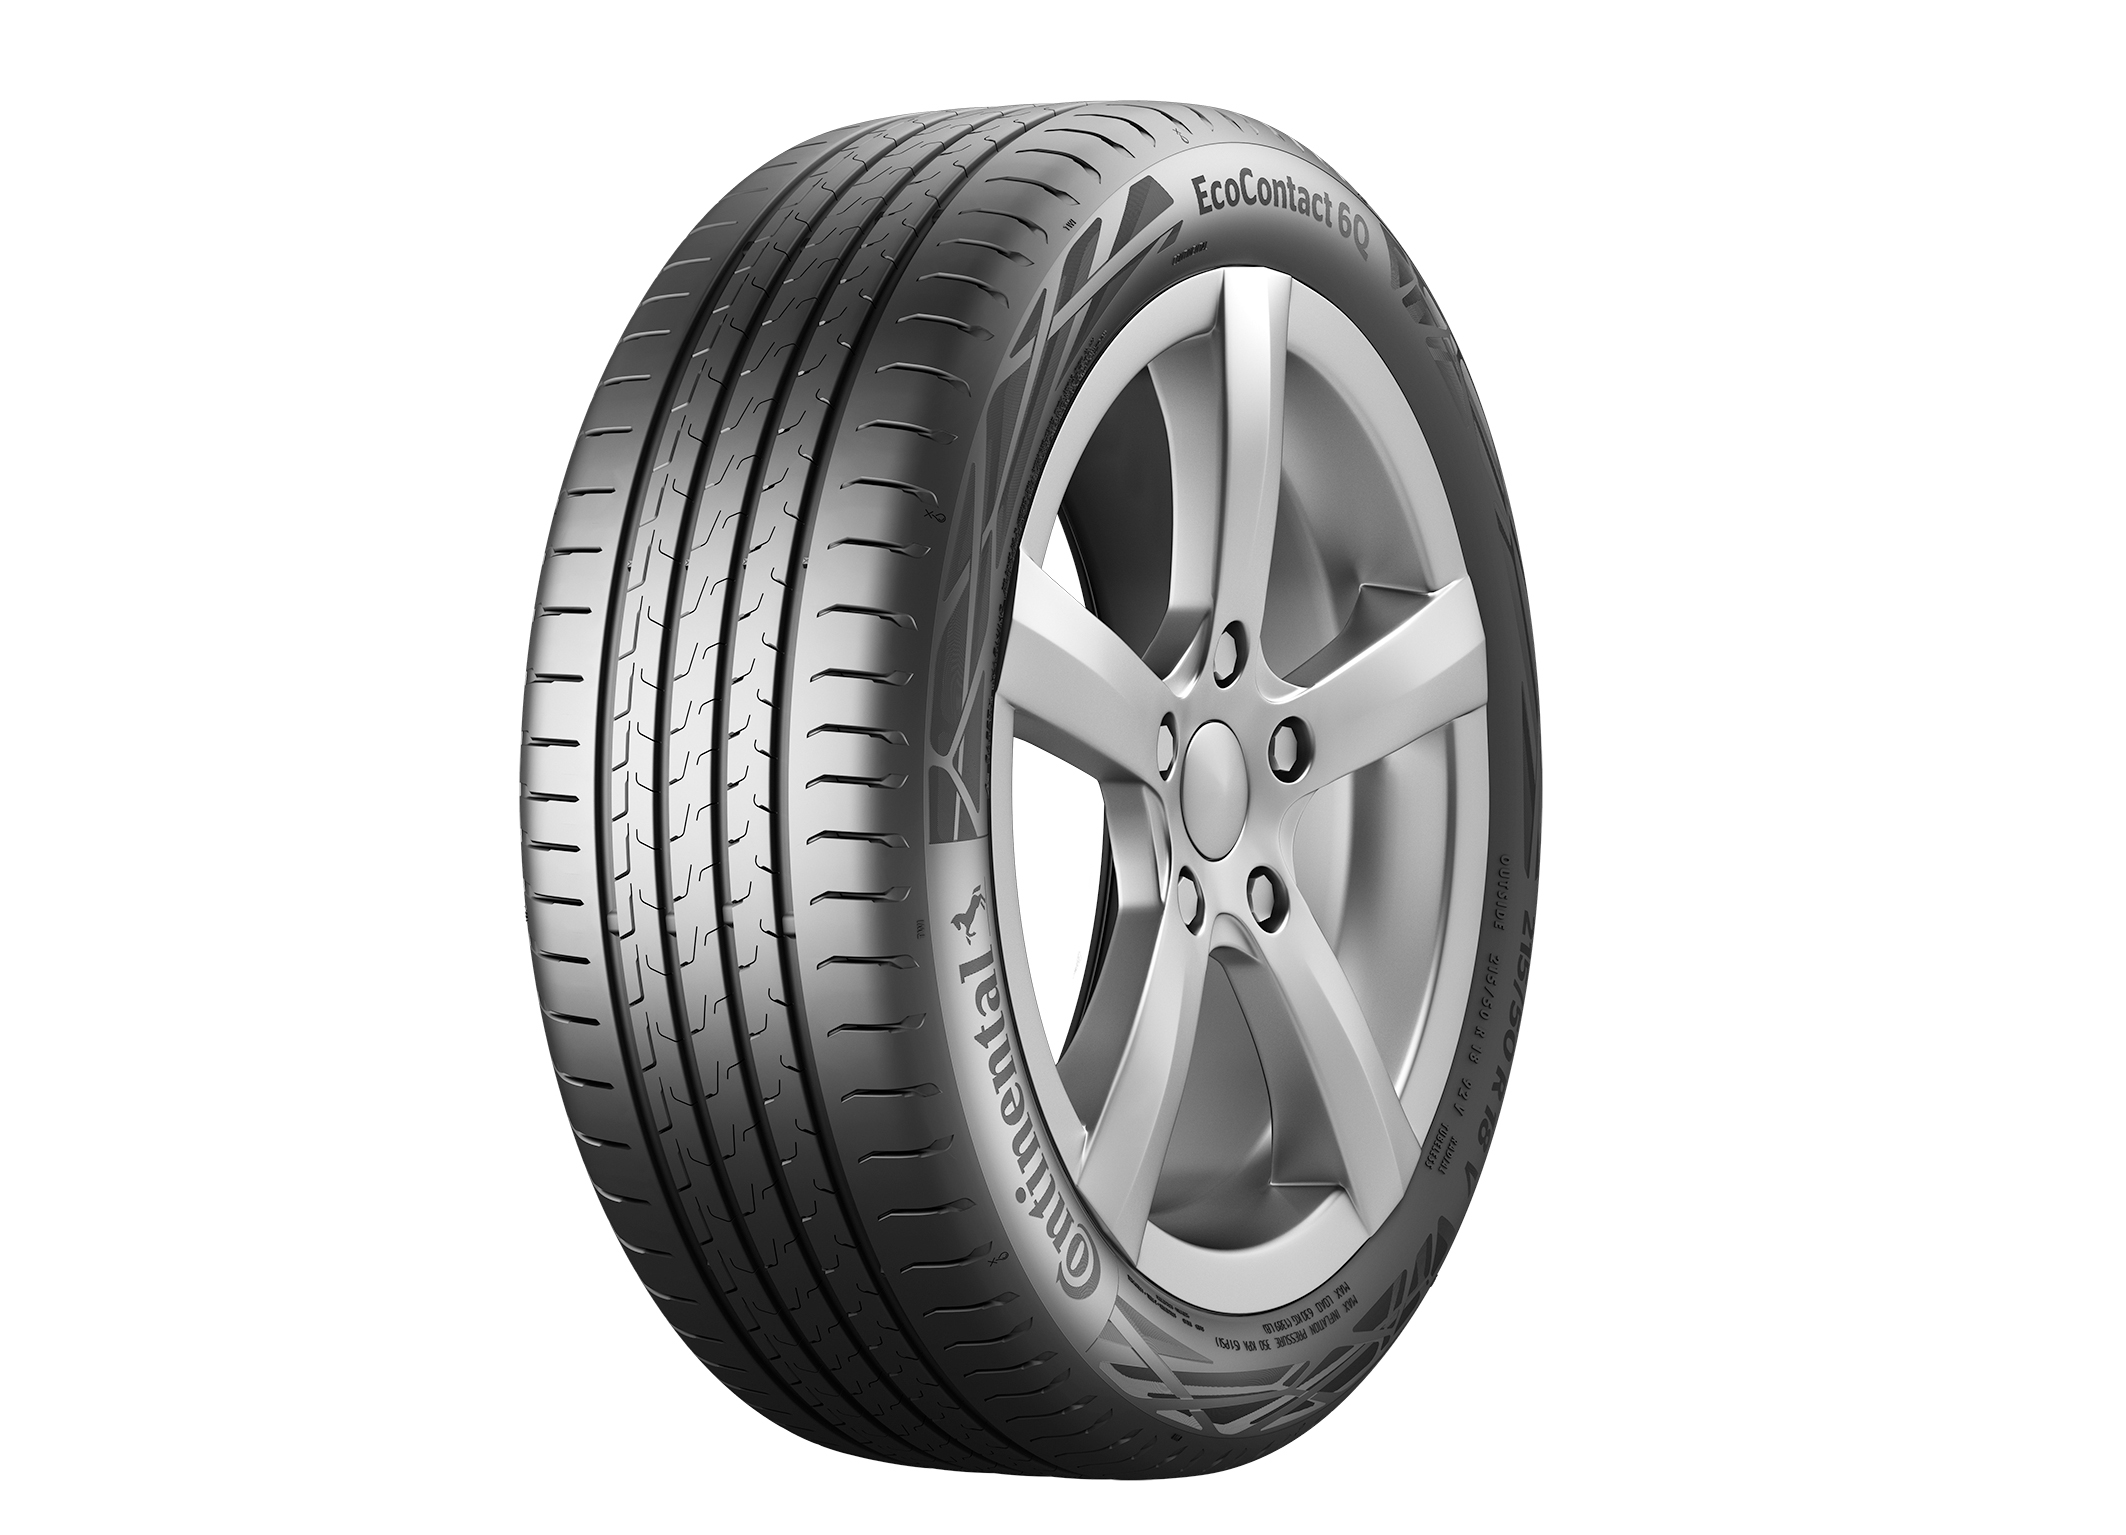 New Mercedes-Benz GLC AG with Fitted - Continental Continental Tires